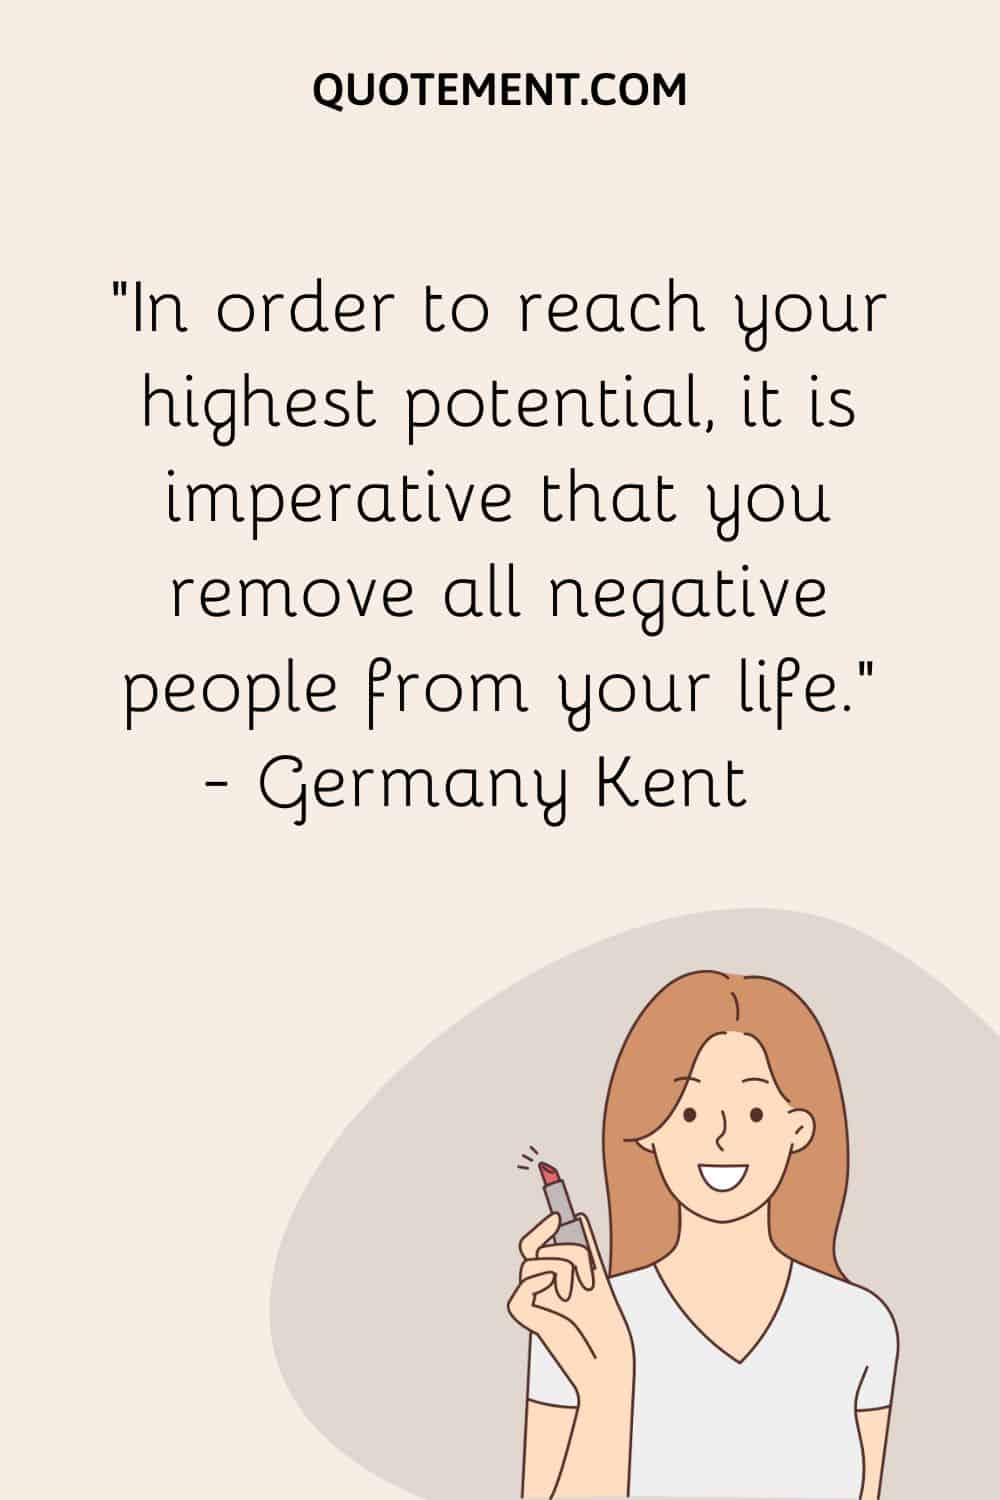 In order to reach your highest potential, it is imperative that you remove all negative people from your life